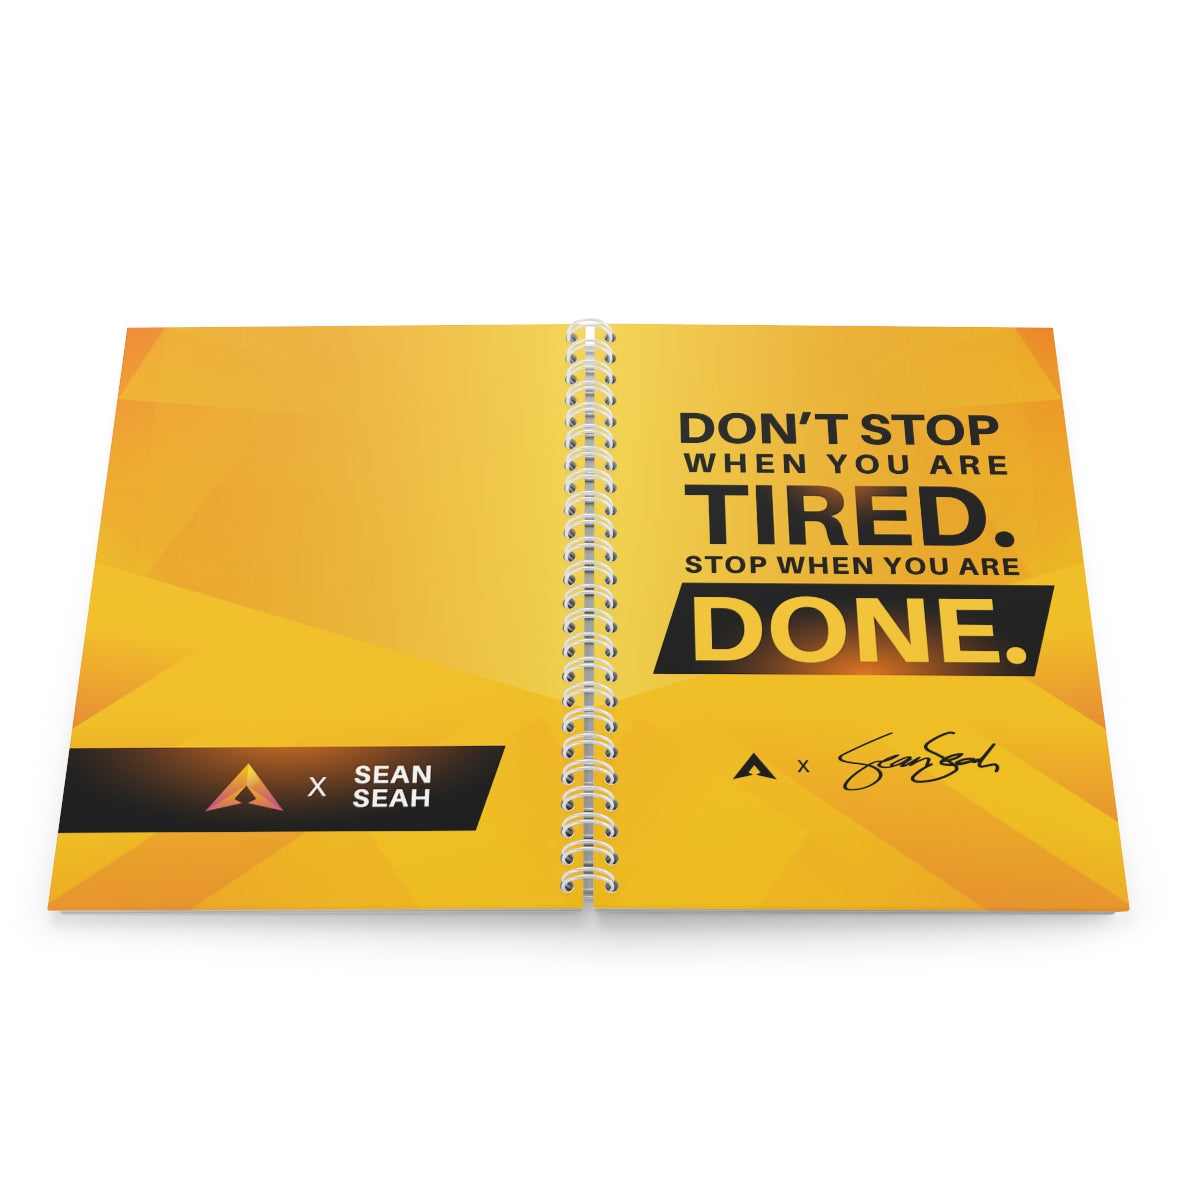 Sean Seah "Don't Stop When You Are Tired" Notebook (Limited Edition)